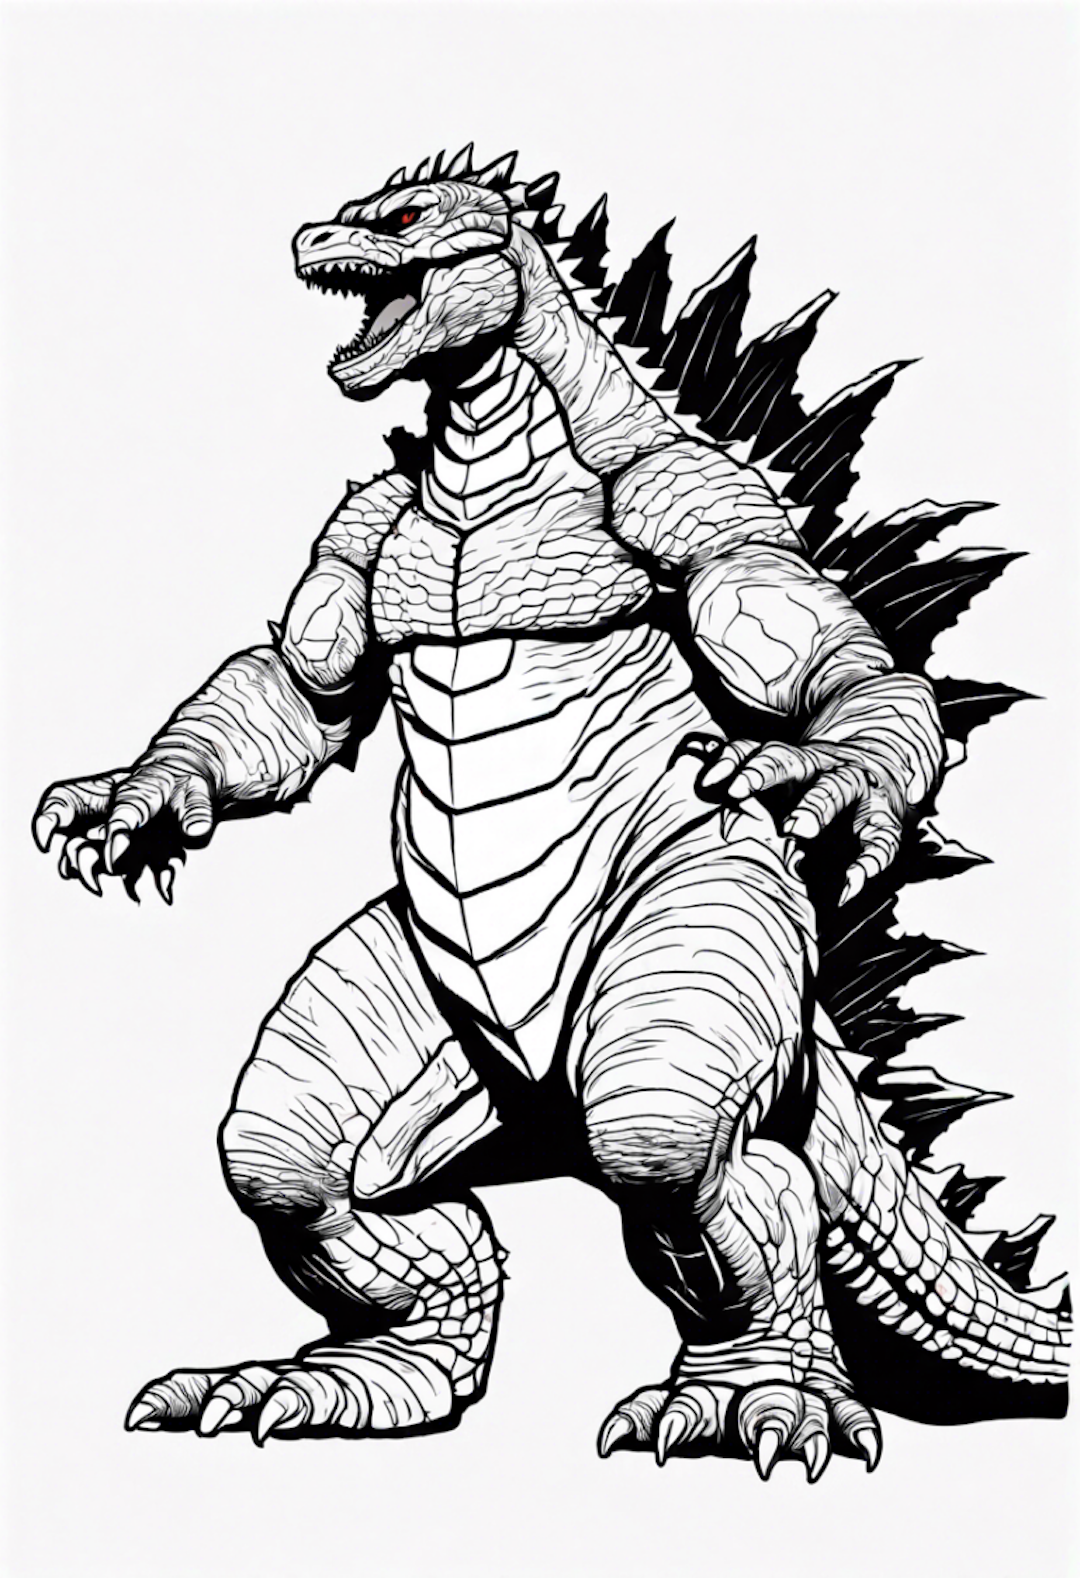 Godzilla Coloring Adventure coloring pages